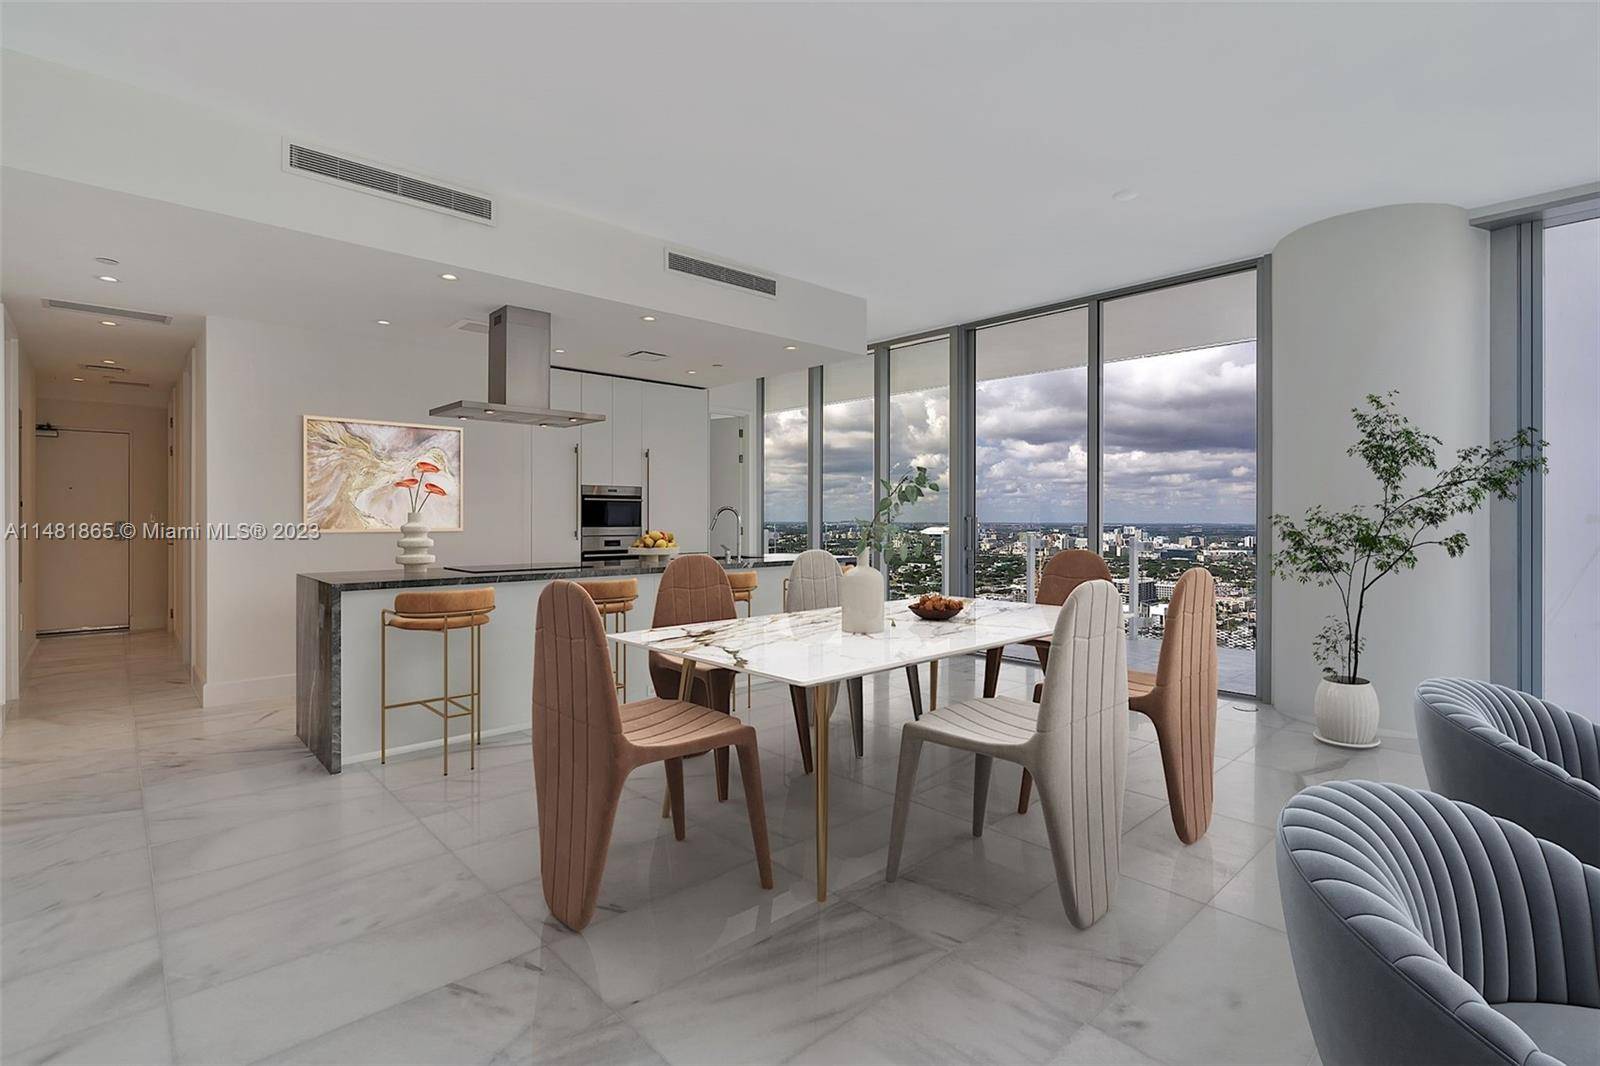 Missoni Baia 3806 A Luxury Corner Unit with Breathtaking Views A stunning 2 bedroom 2 bathroom unit in the newest and most exclusive luxury tower in East Edgewater.